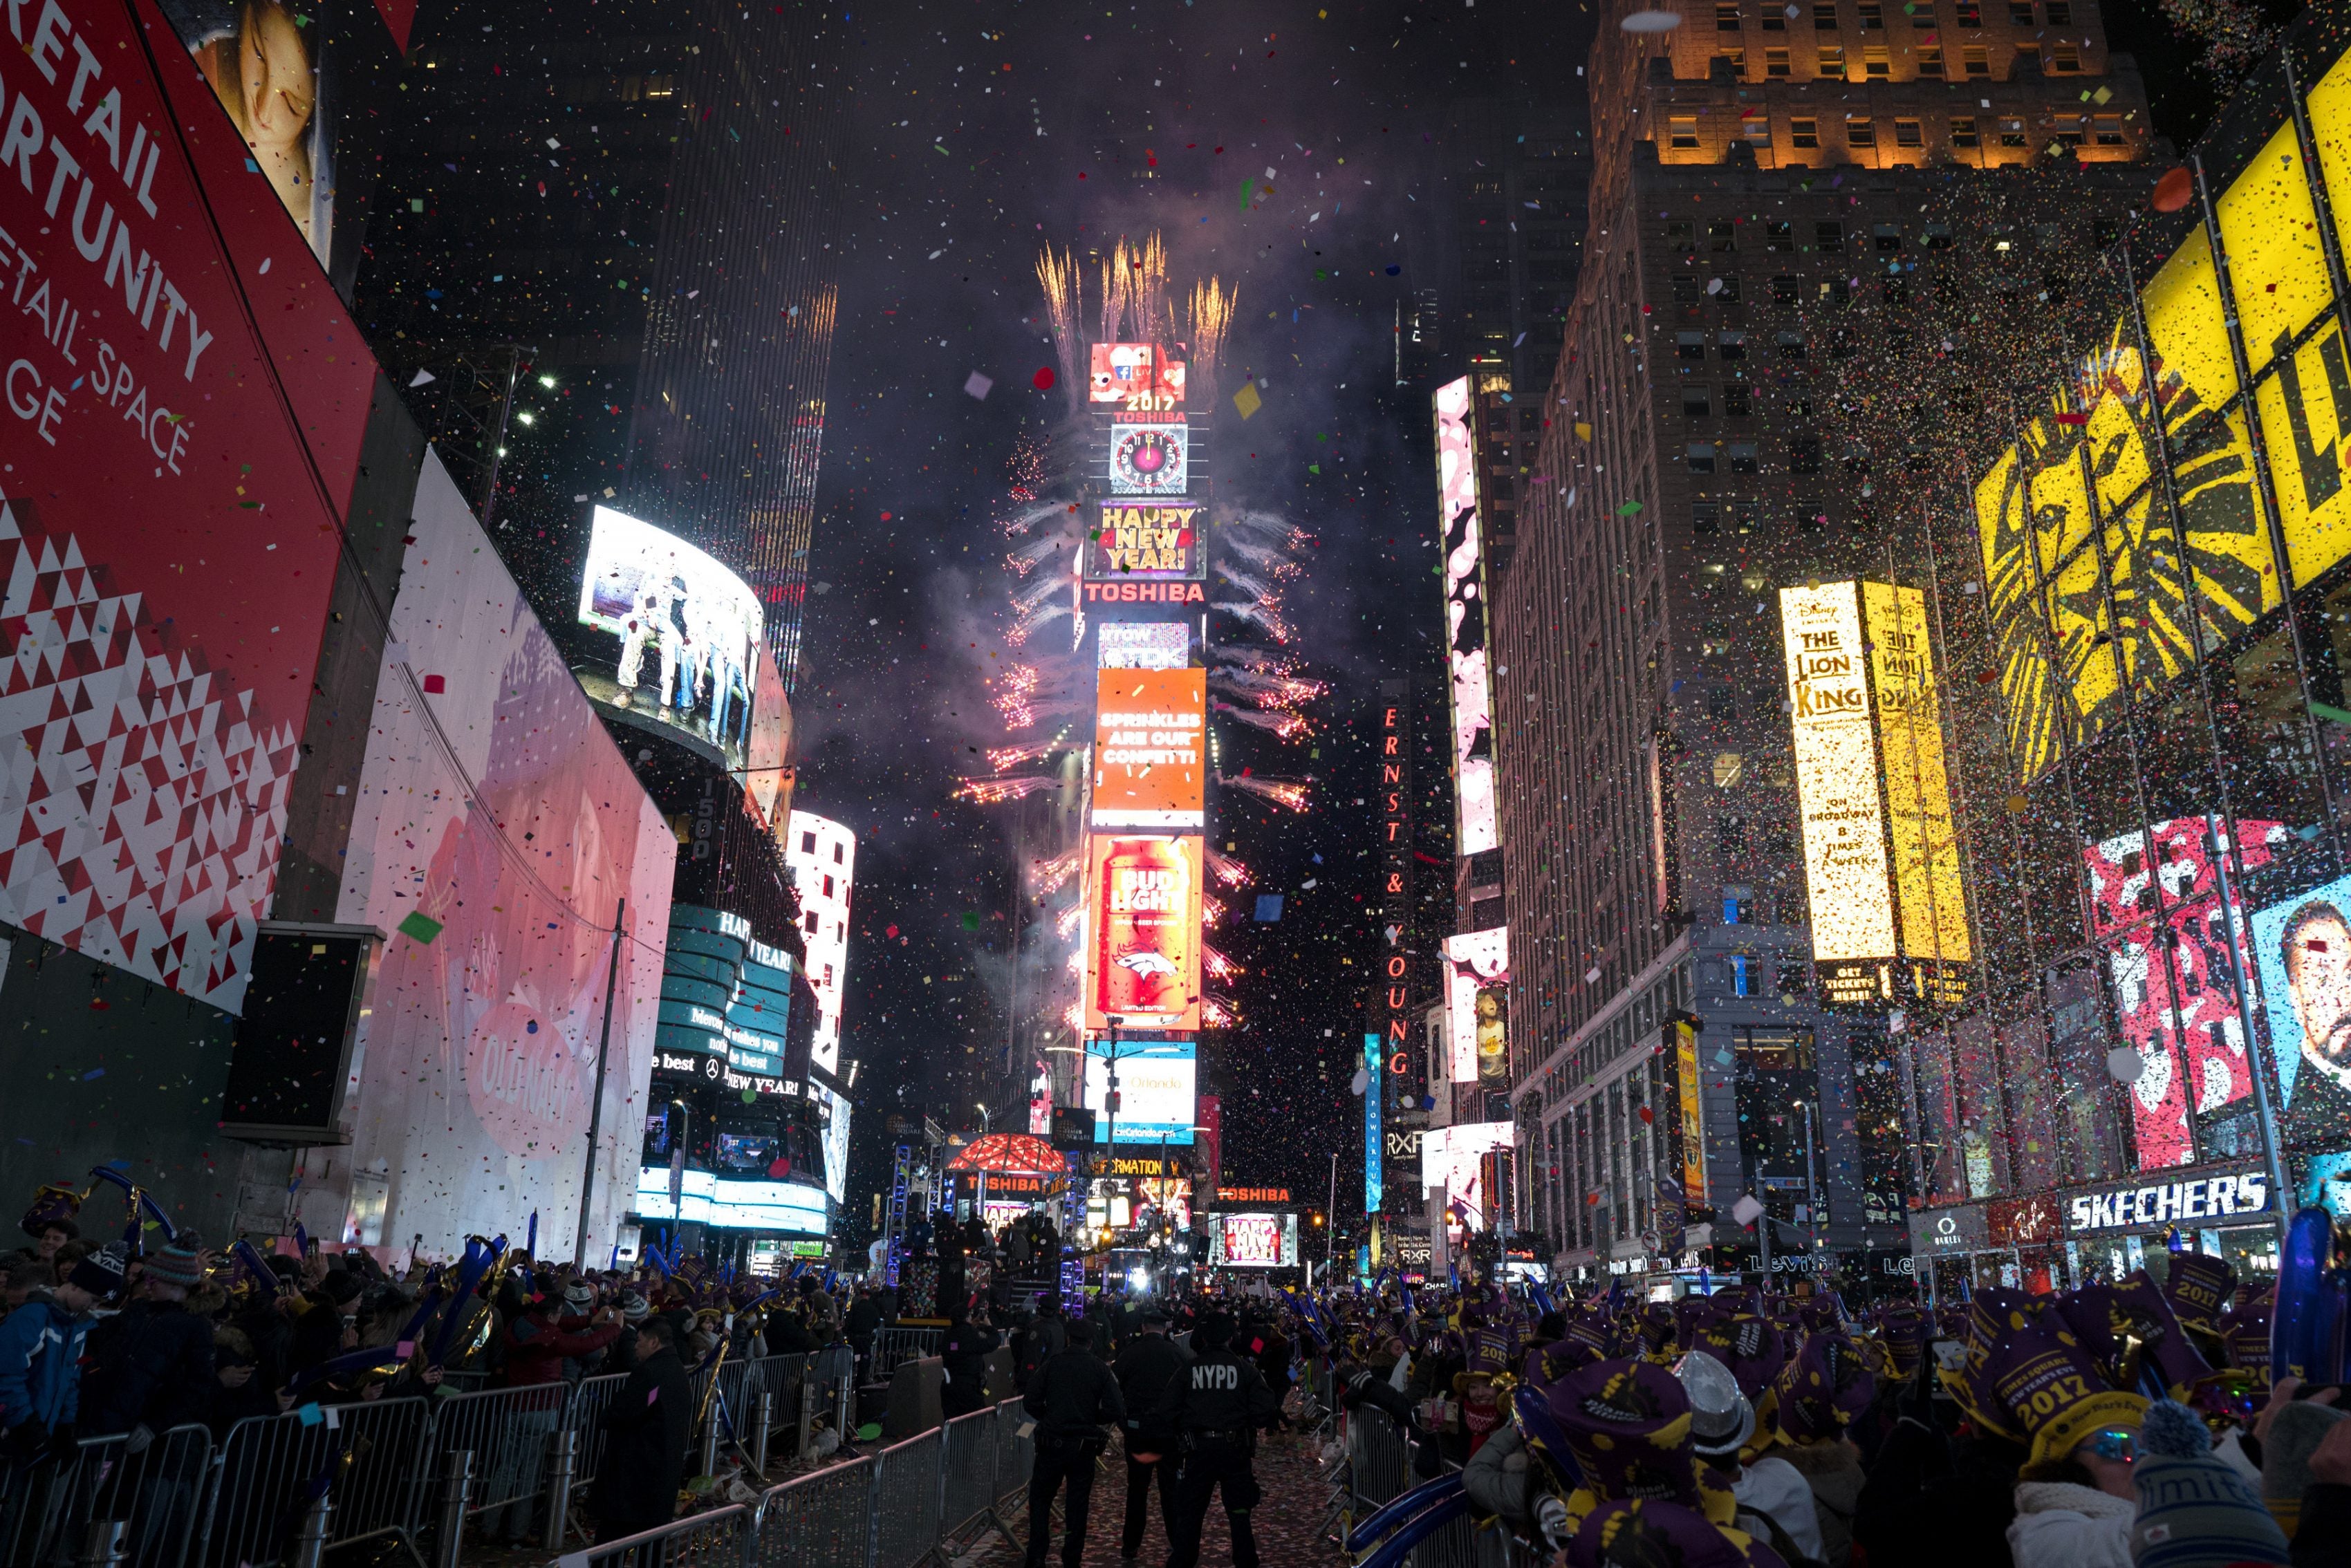 Science teachers, students get Times Square New Year’s stage - WHYY